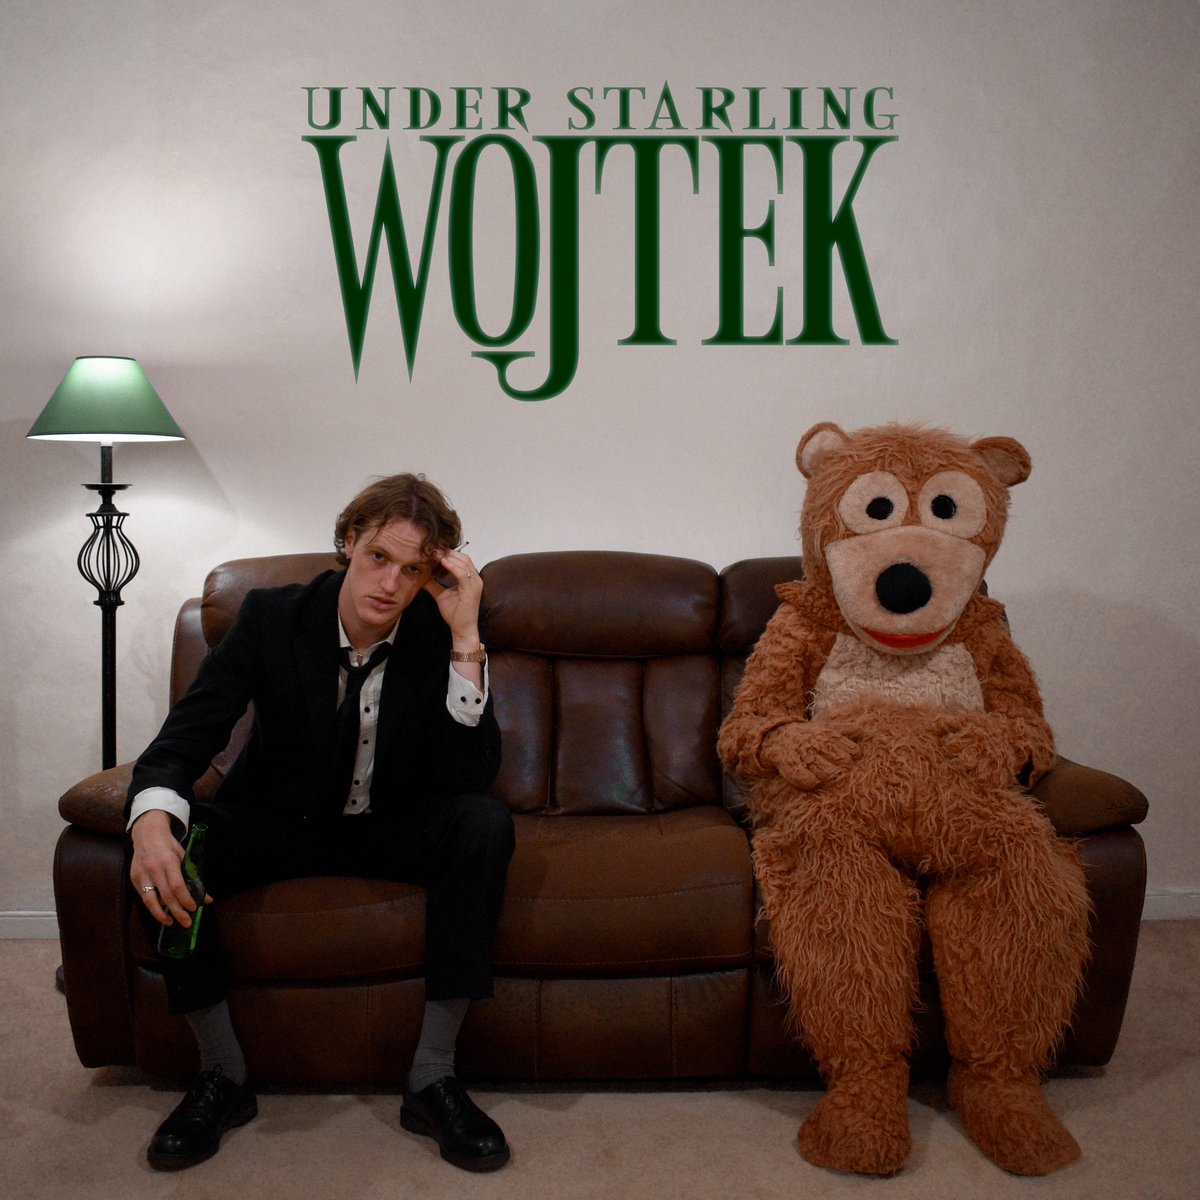 Our new single ‘Wojtek’ is on the way! Bear with us… In the mean time you can pre-save it now through the link below. hypeddit.com/fjrvgy